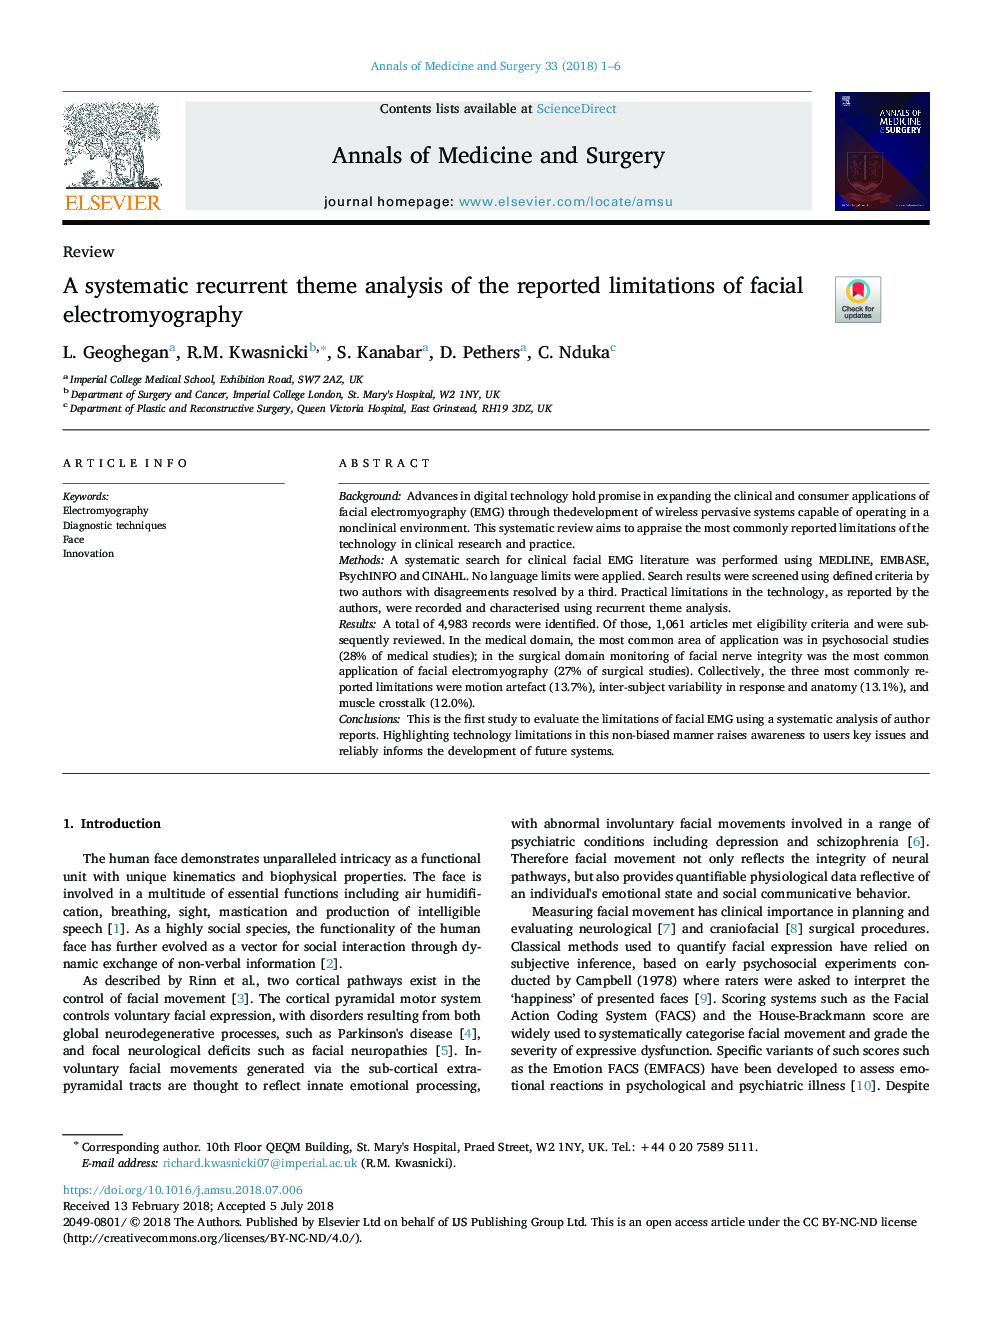 A systematic recurrent theme analysis of the reported limitations of facial electromyography